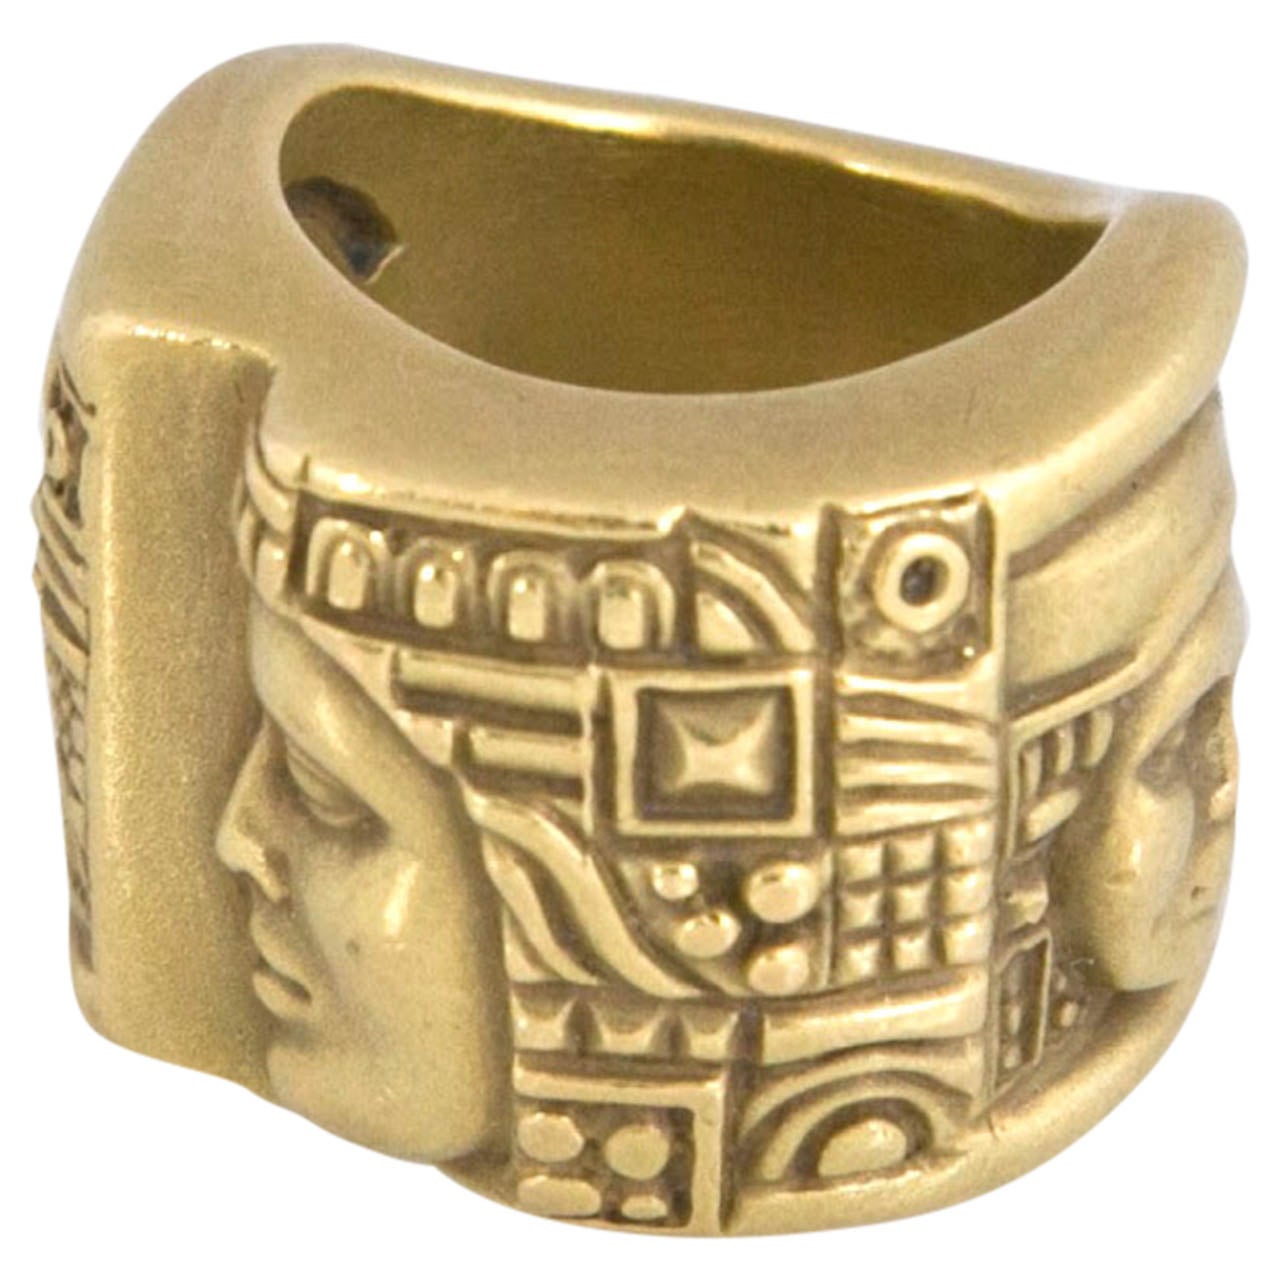 Barry Kieselstein-Cord "Women Of The World" Gold Ring For Sale